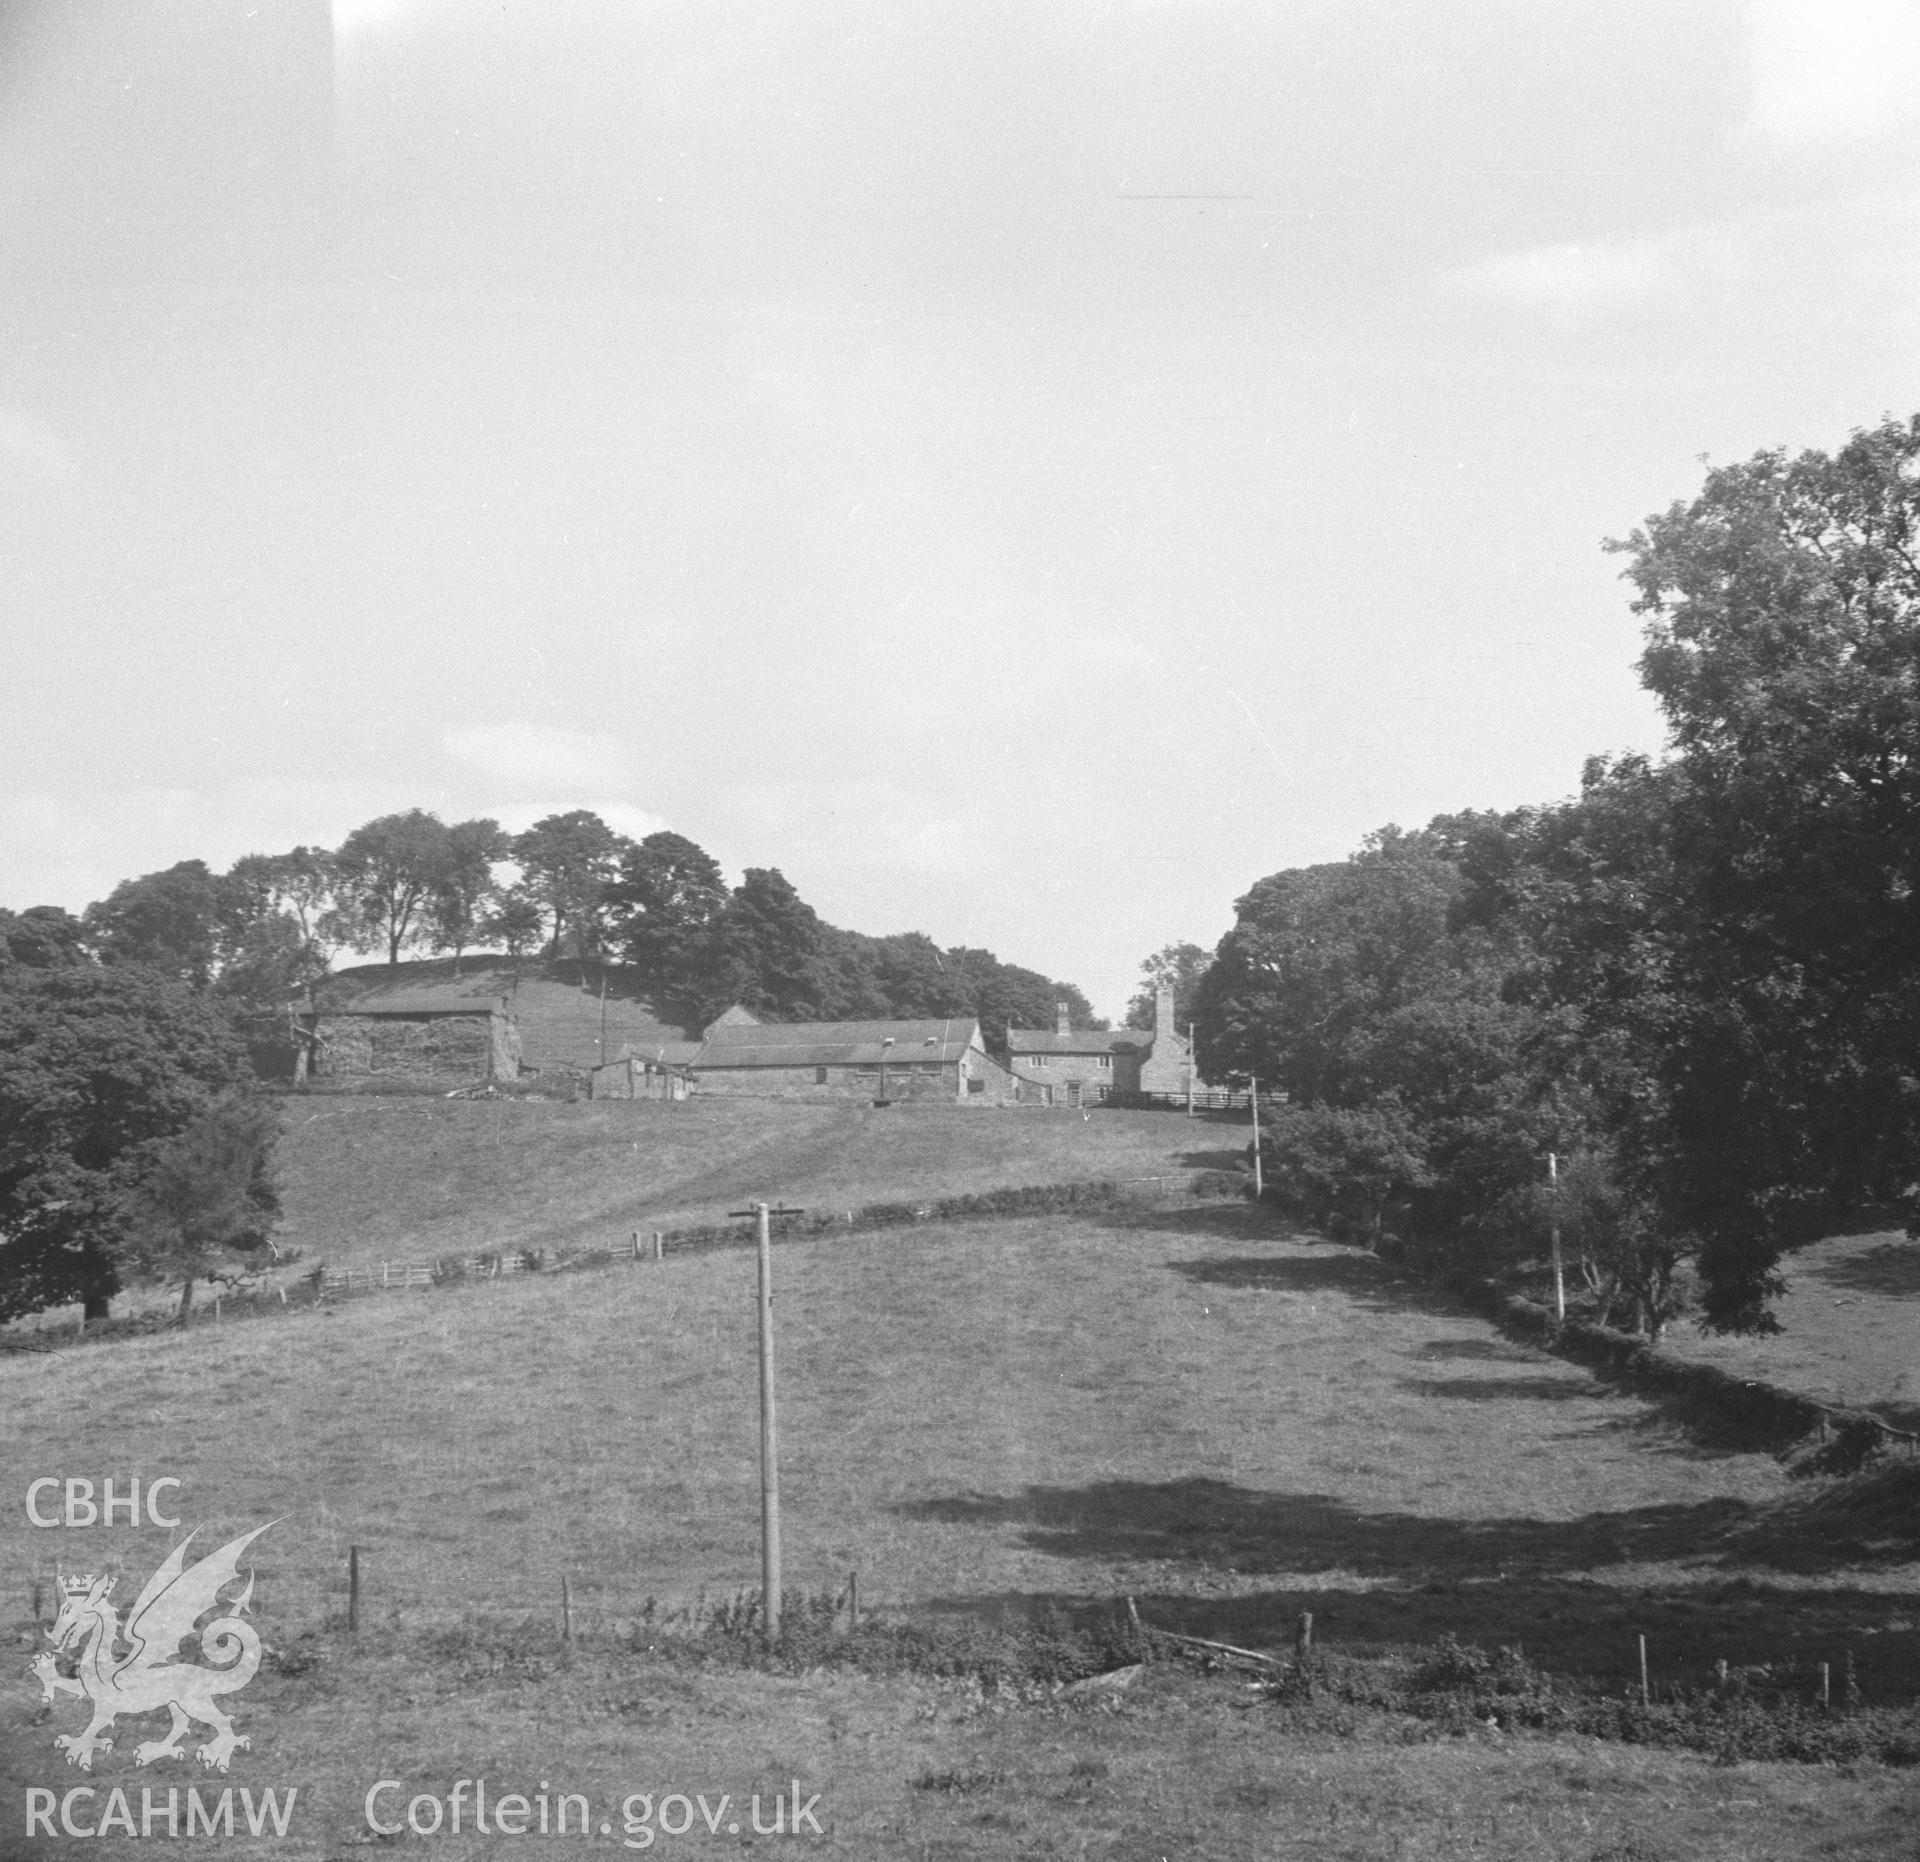 Digital copy of a black and white nitrate negative, view of Chimnai Hir in its setting.